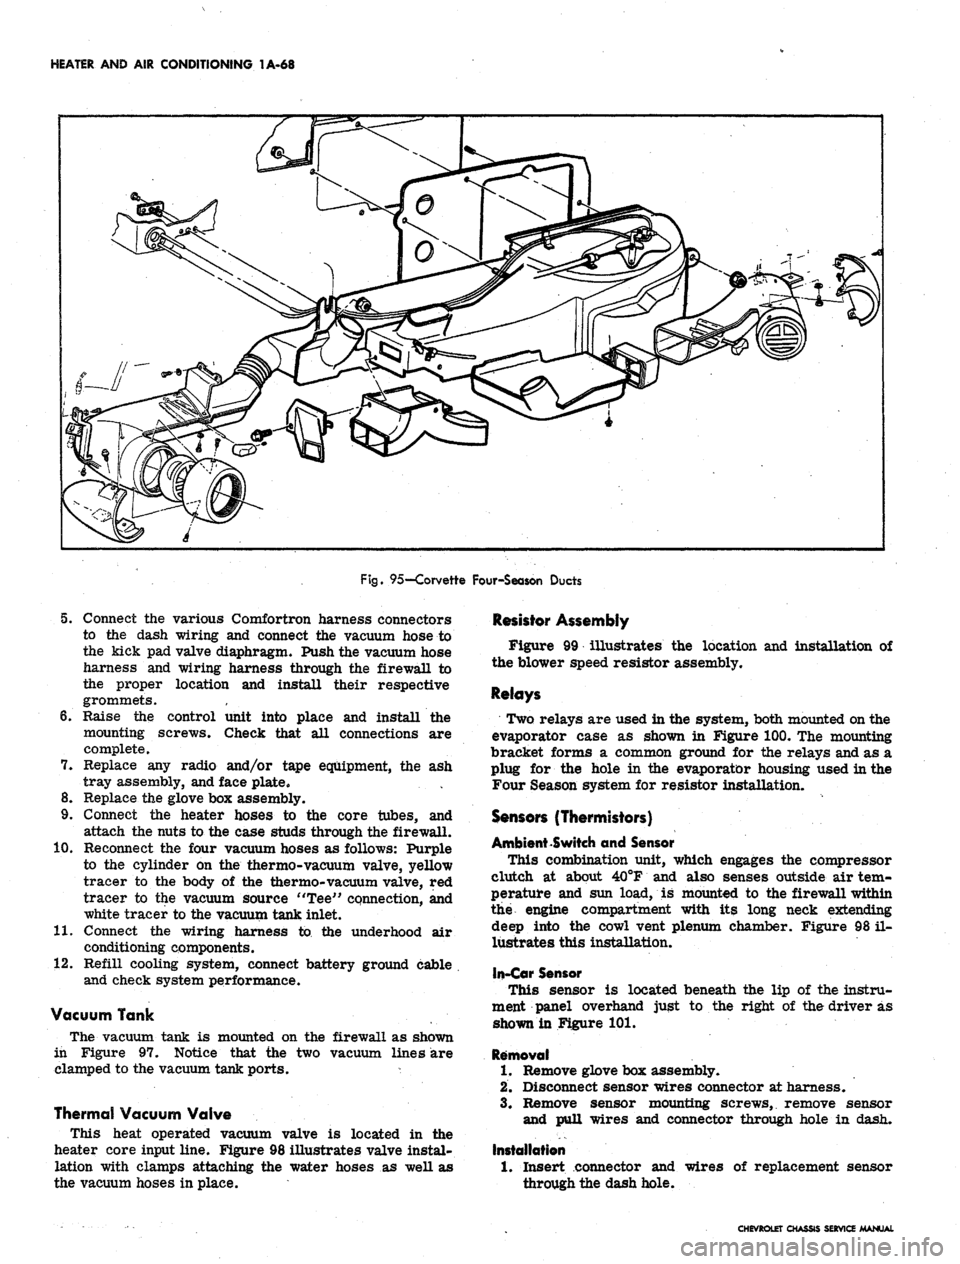 CHEVROLET CAMARO 1967 1.G Chassis Workshop Manual 
HEATER AND AIR CONDITIONING 1A-68

Fig.
 95—Corvette Four-Season Ducts

5. Connect the various Comfortron harness connectors

to the dash wiring and connect the vacuum hose to

the kick pad valve d